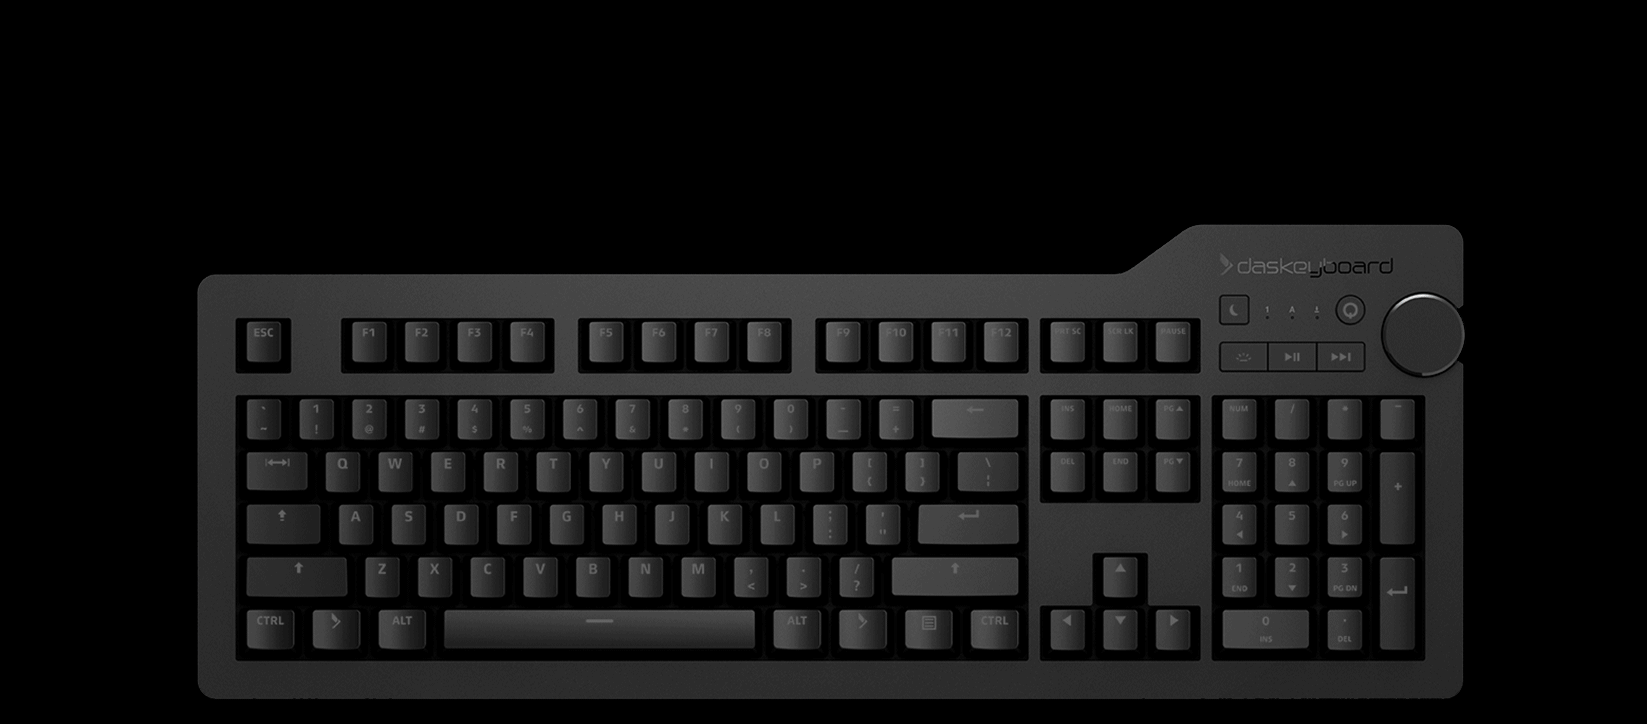 4Q keyboard with applets from the Q marketplace